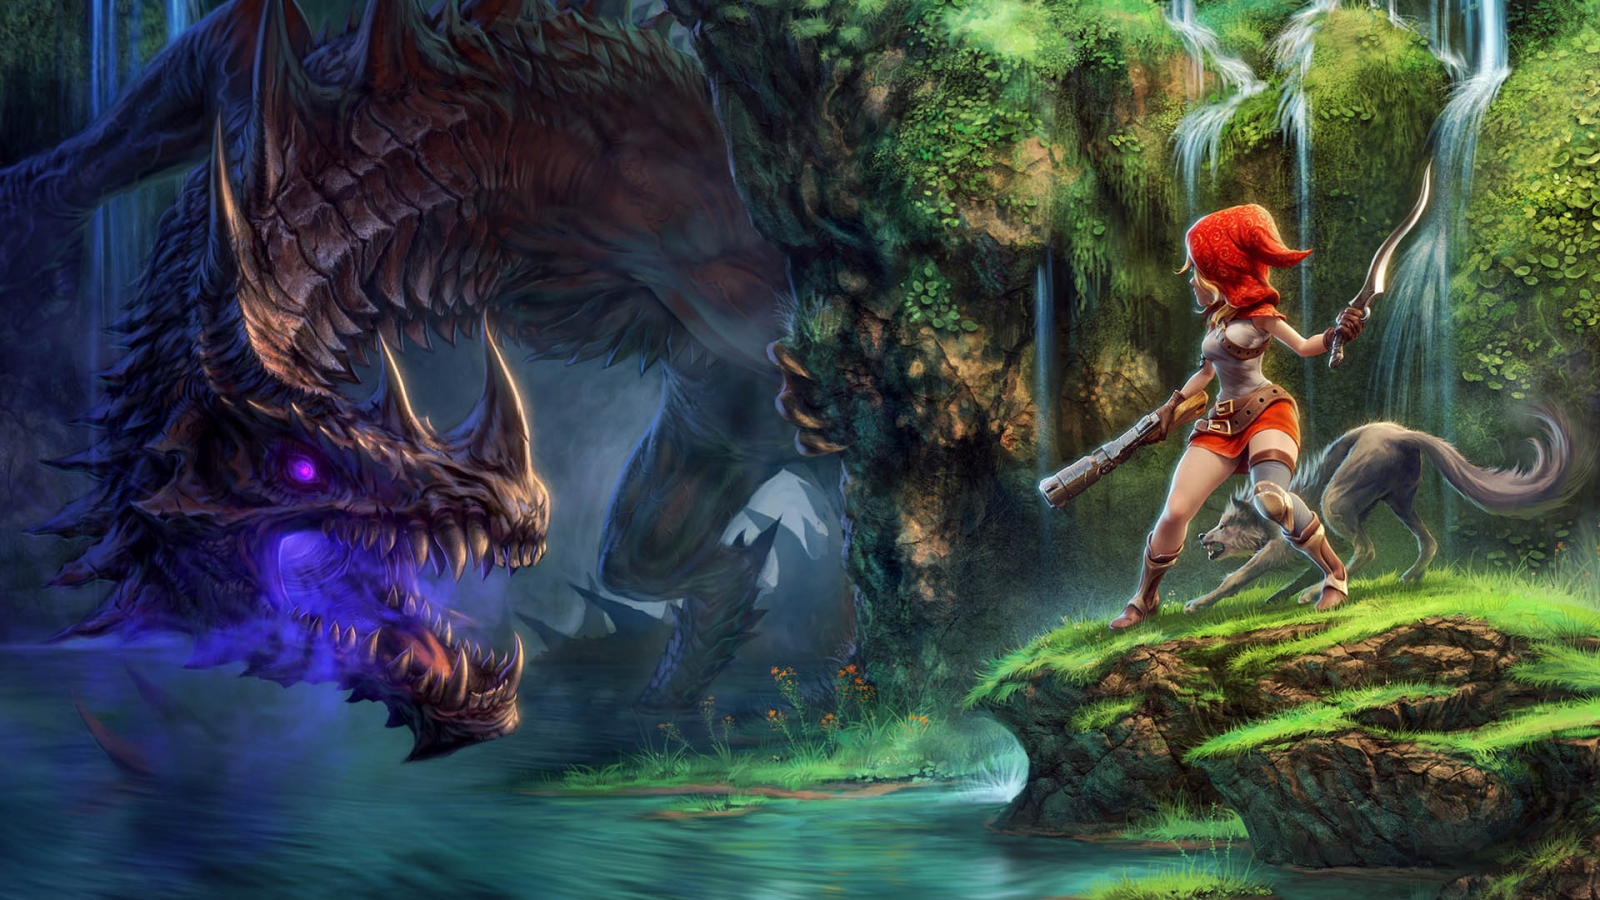 Dragon Fin Soup Game for 1600 x 900 HDTV resolution